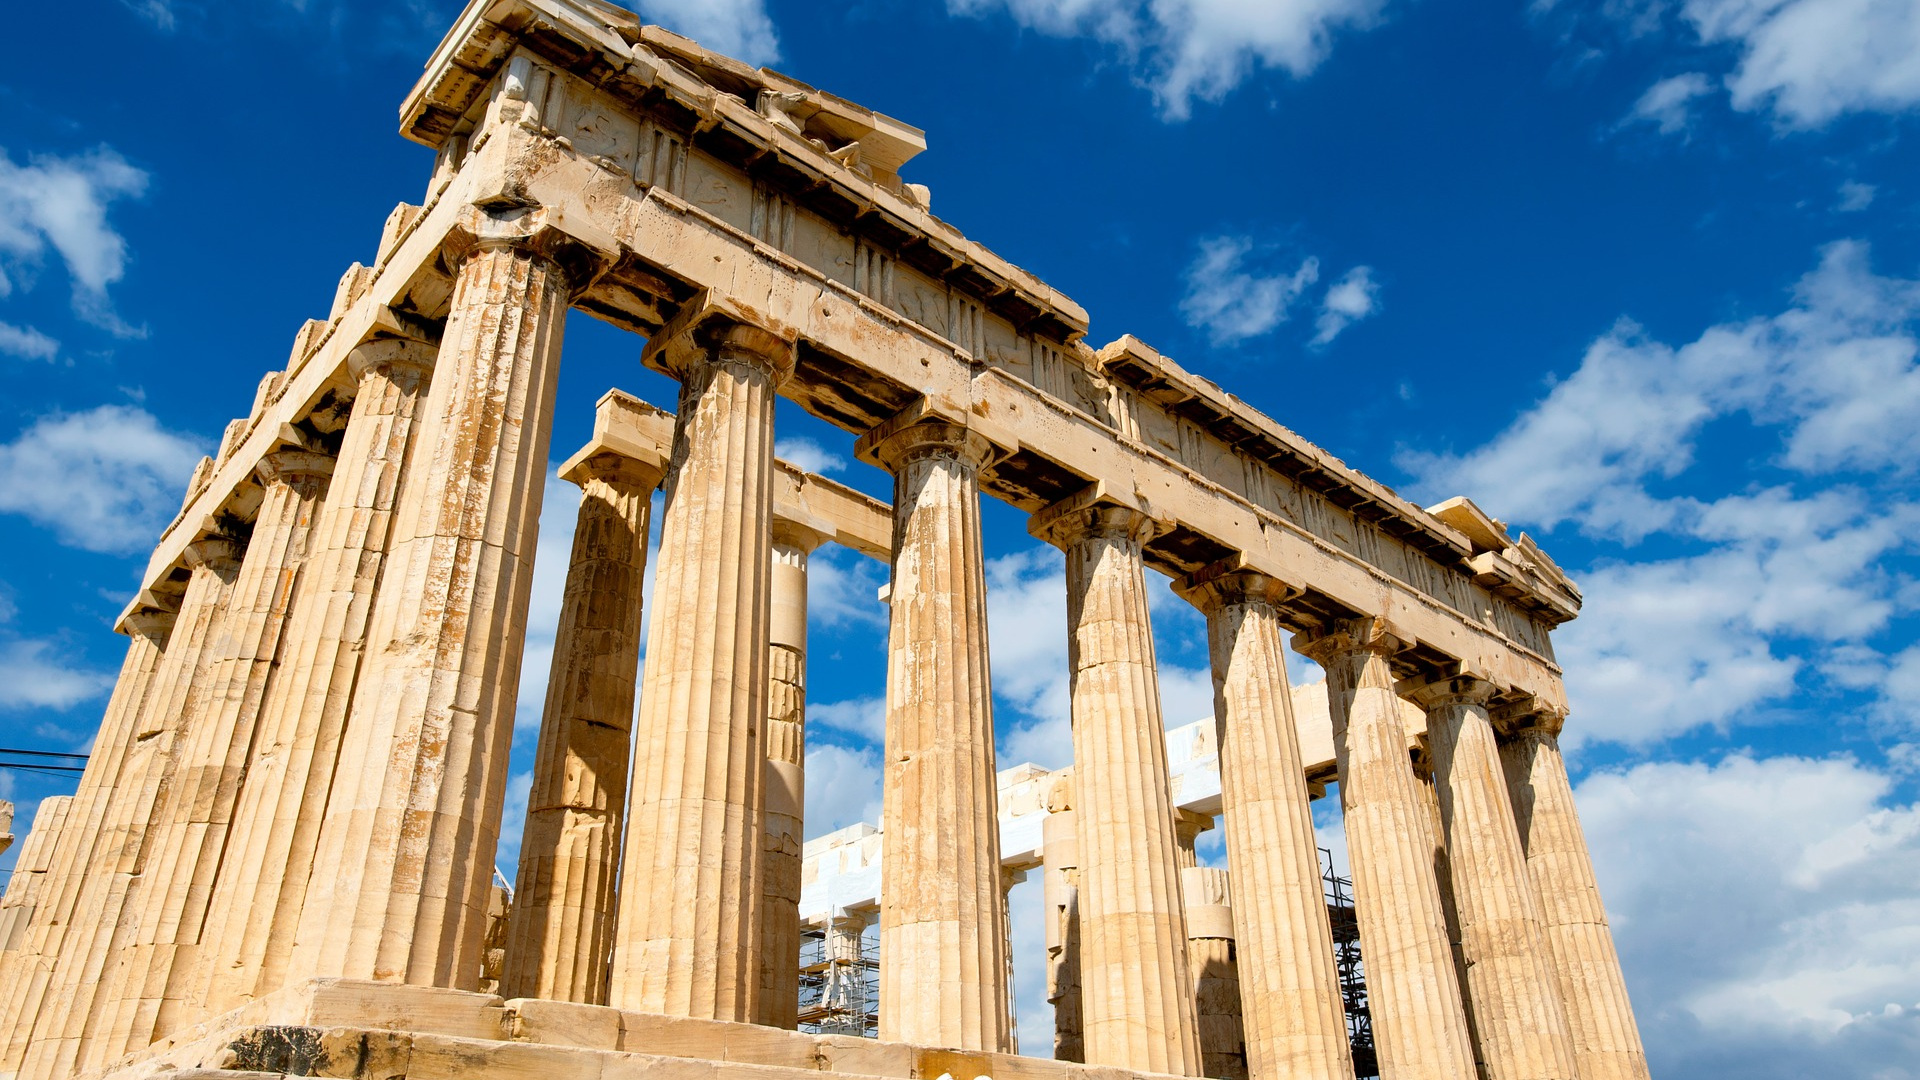 8-DAY CLASSICAL GREECE